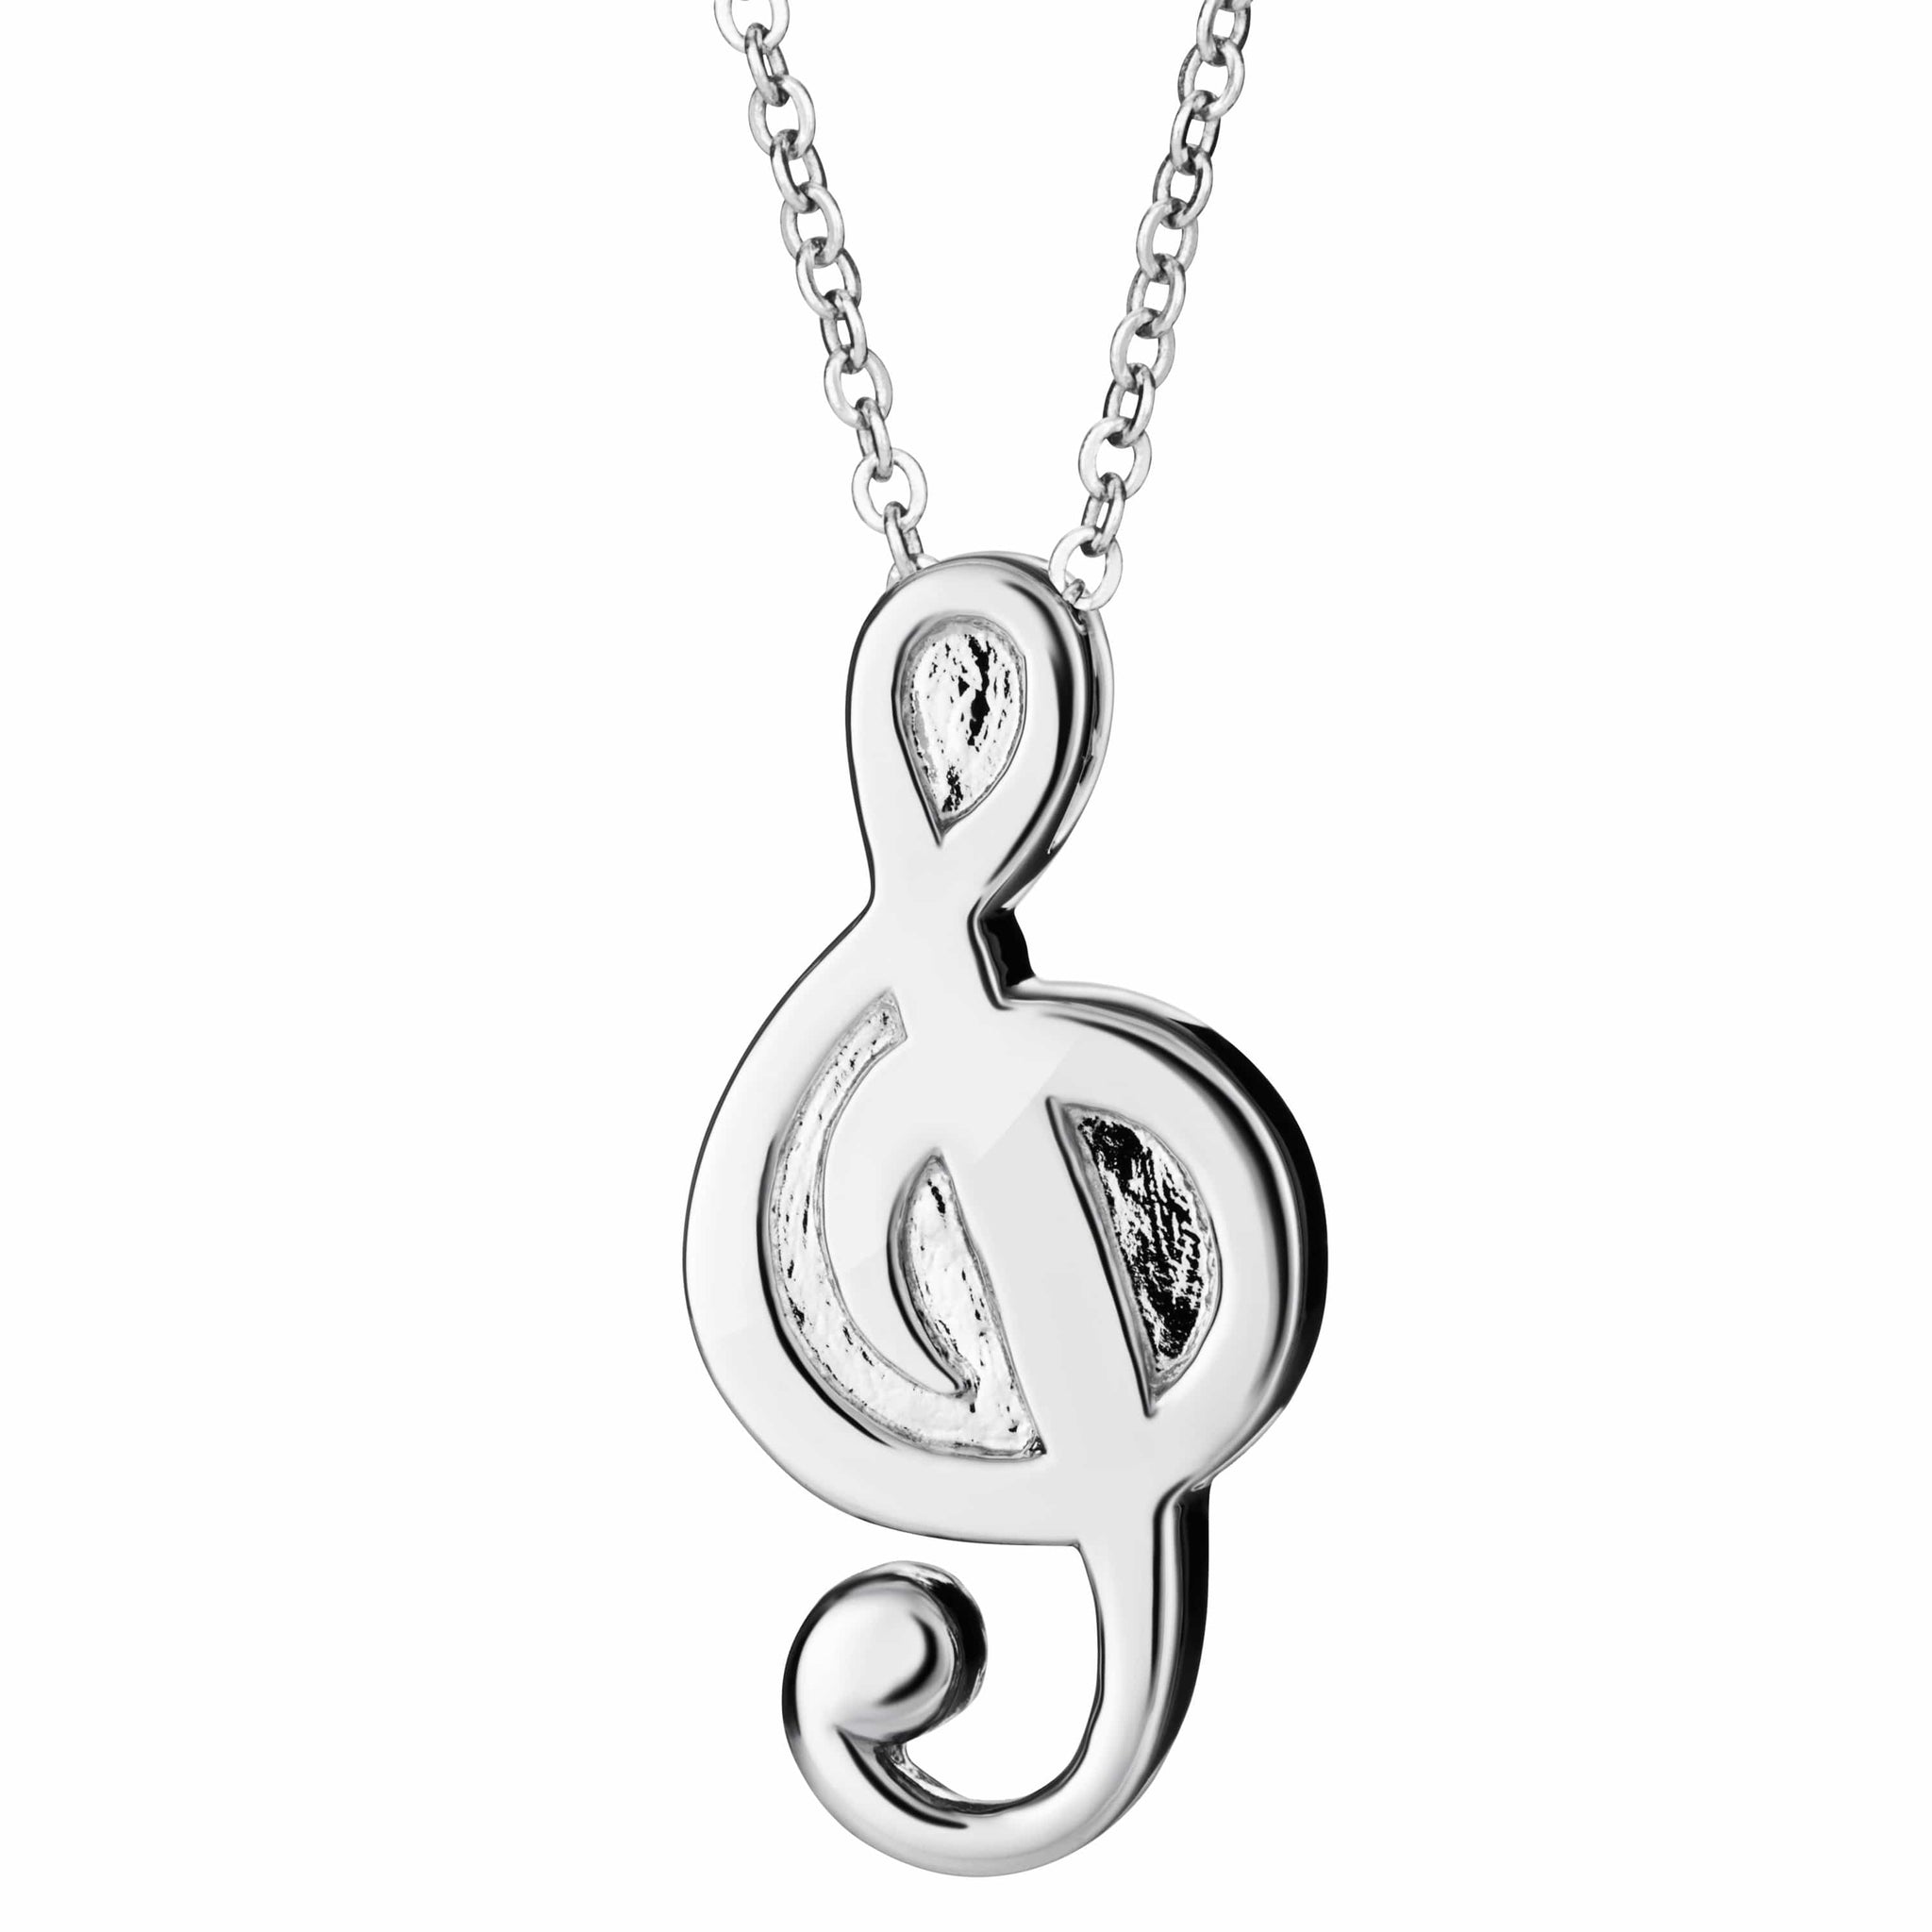 The Music Note Pendant